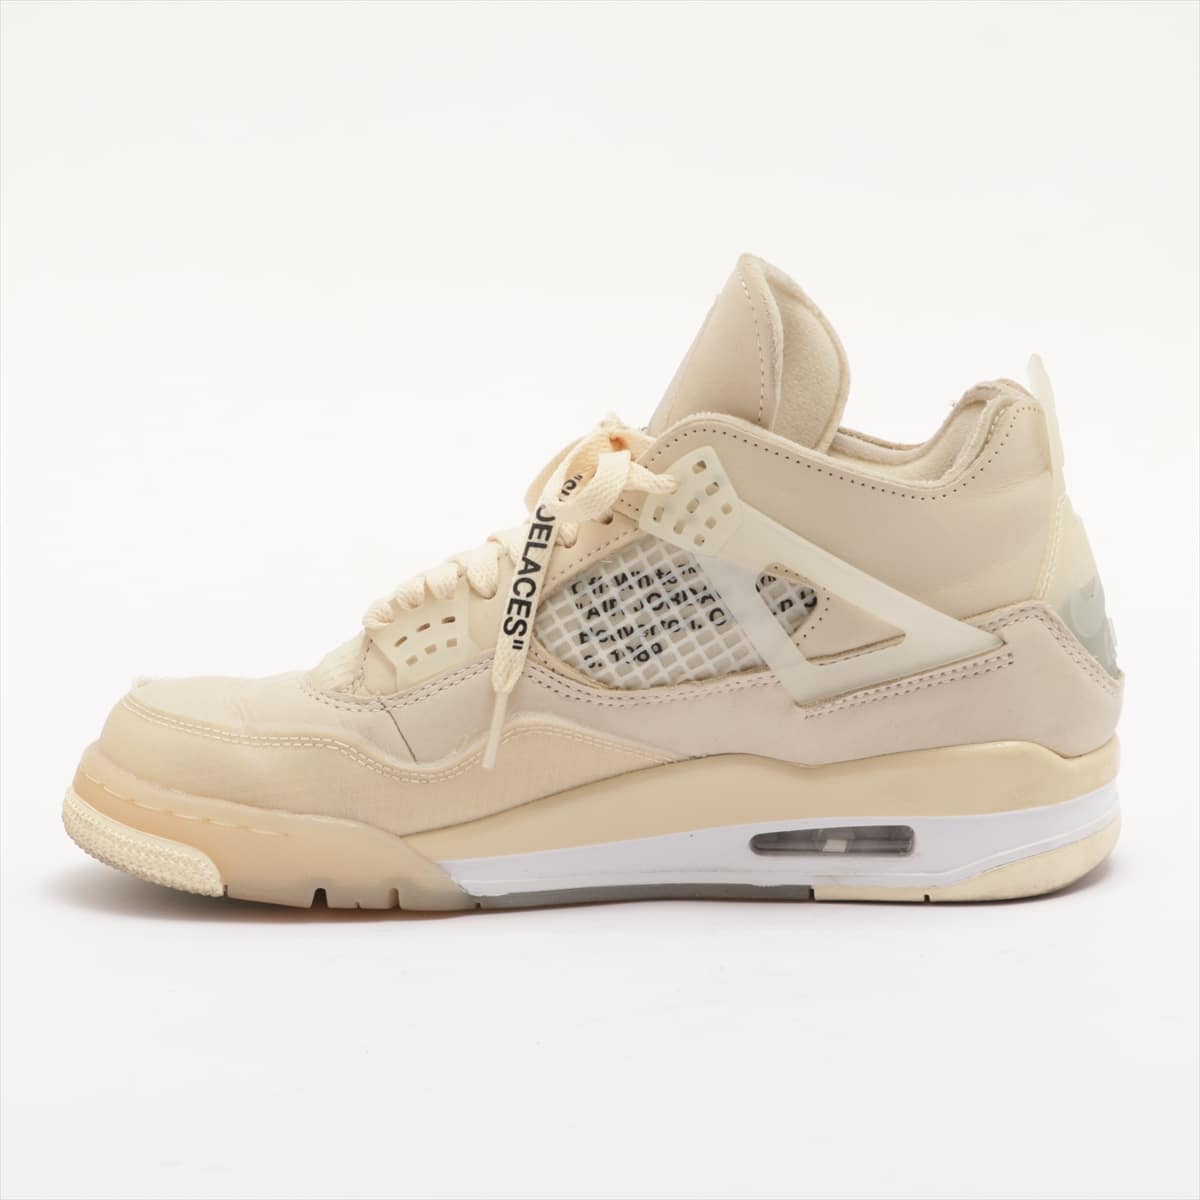 NIKE × OFF-WHITE AIR JORDAN 4 Leather Sneakers WMNS 26cm / MENS 25.5cm Unisex Ivory CV9388-100 Comes with a replacement string